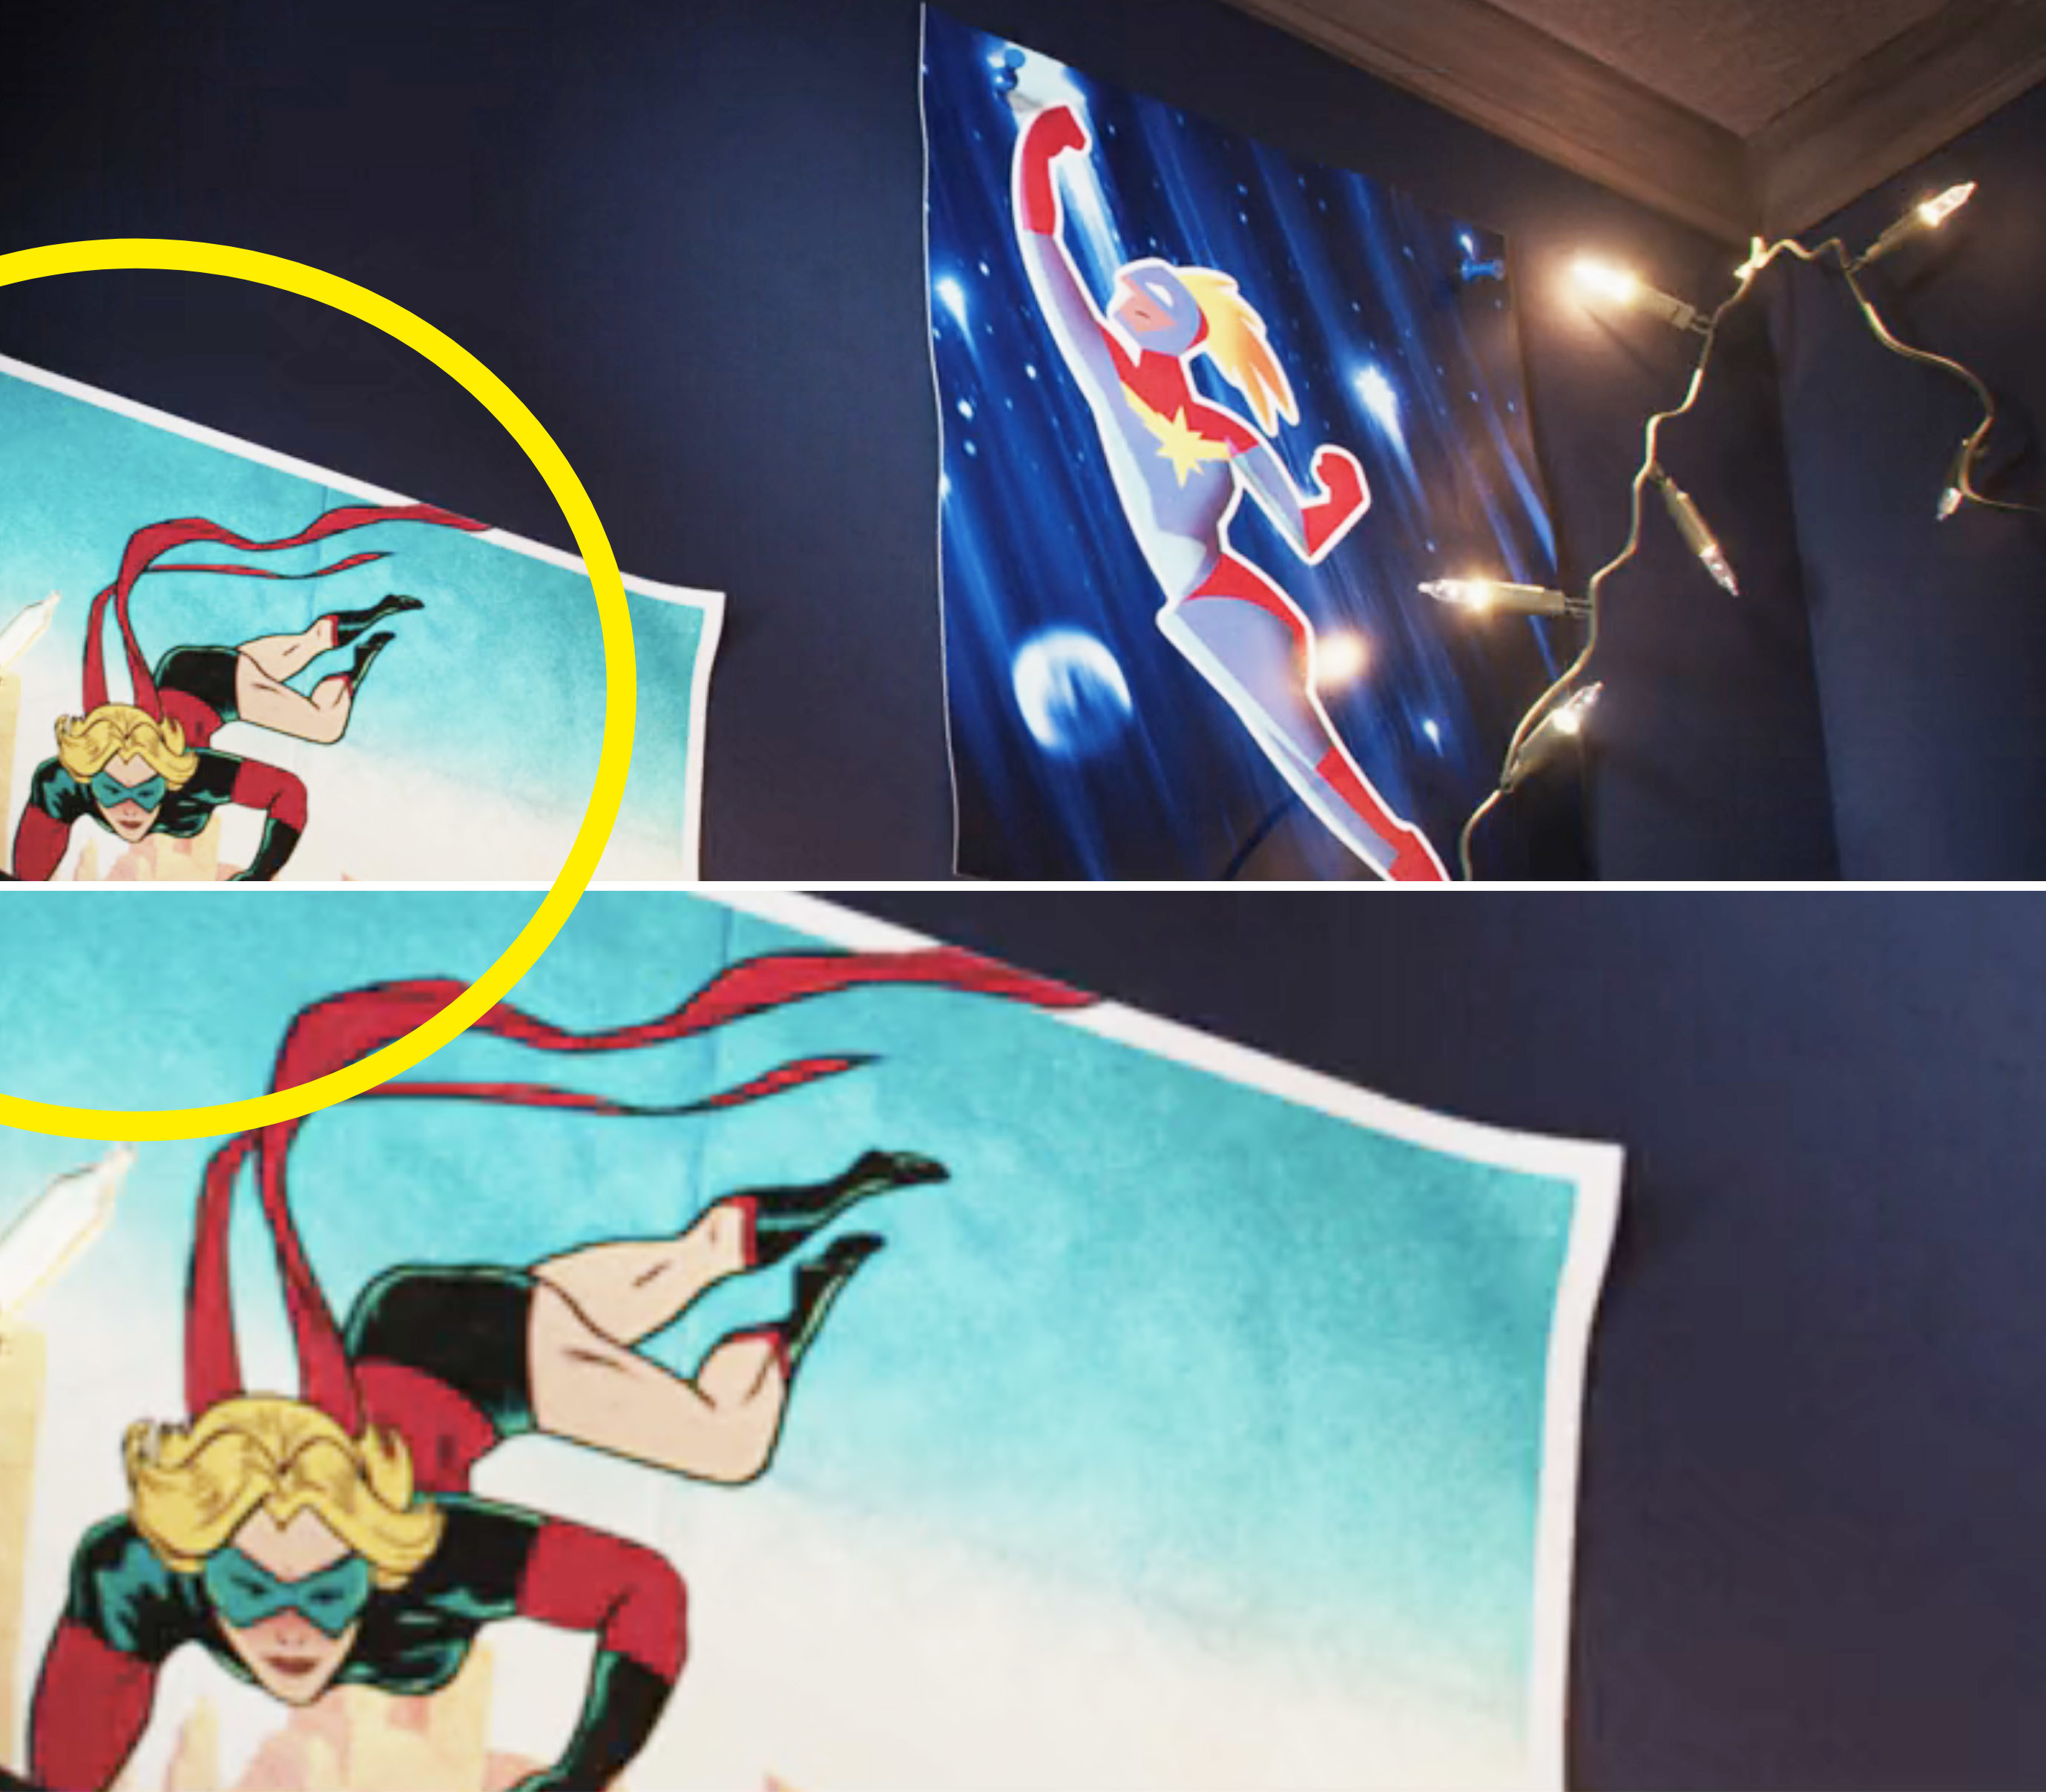 A glimpse of the old costume that features a red and black top with a scarf but no pants, next to the more modern costume that is red and blue with a gold logo